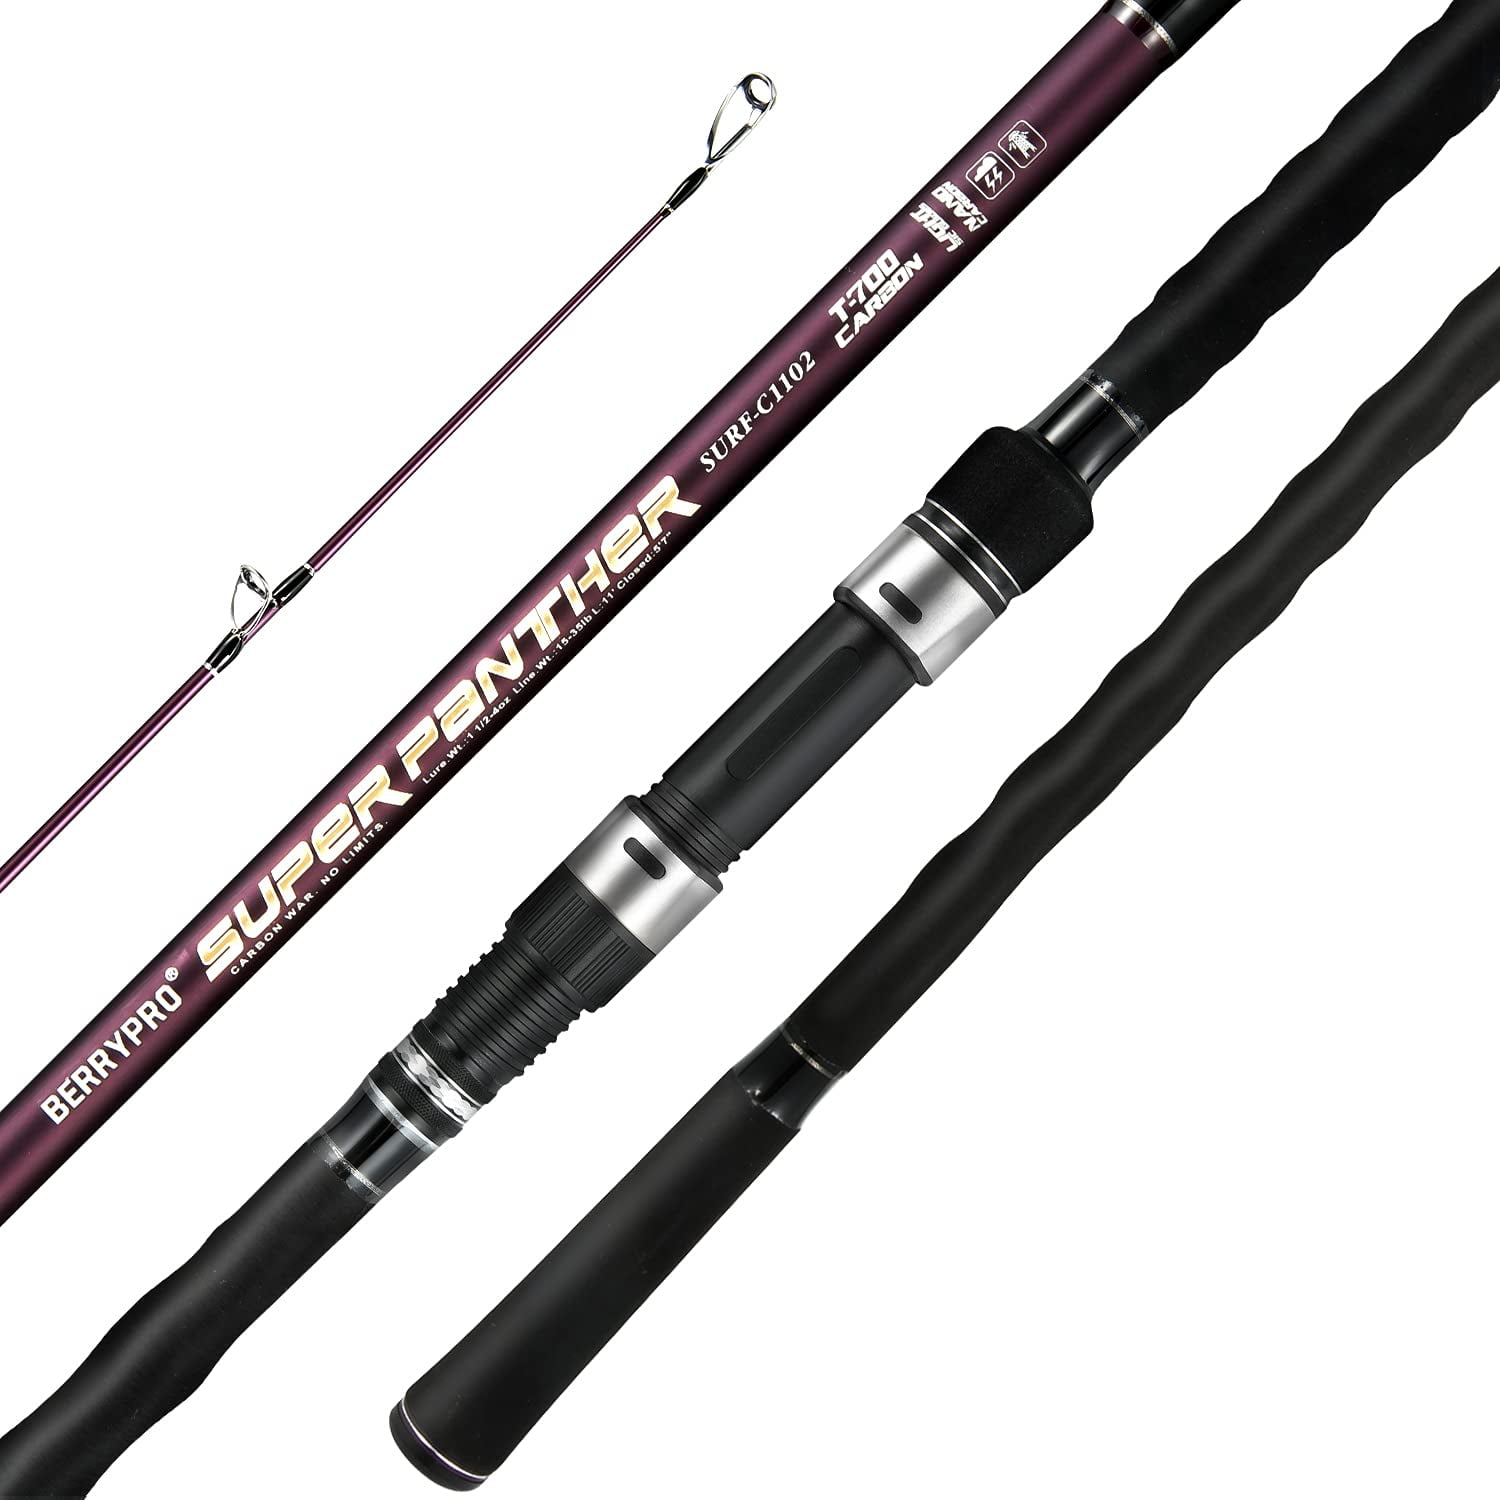 BERRYPRO Surf Spinning Fishing Rod Graphite Spinning Rod 11'-2pc 